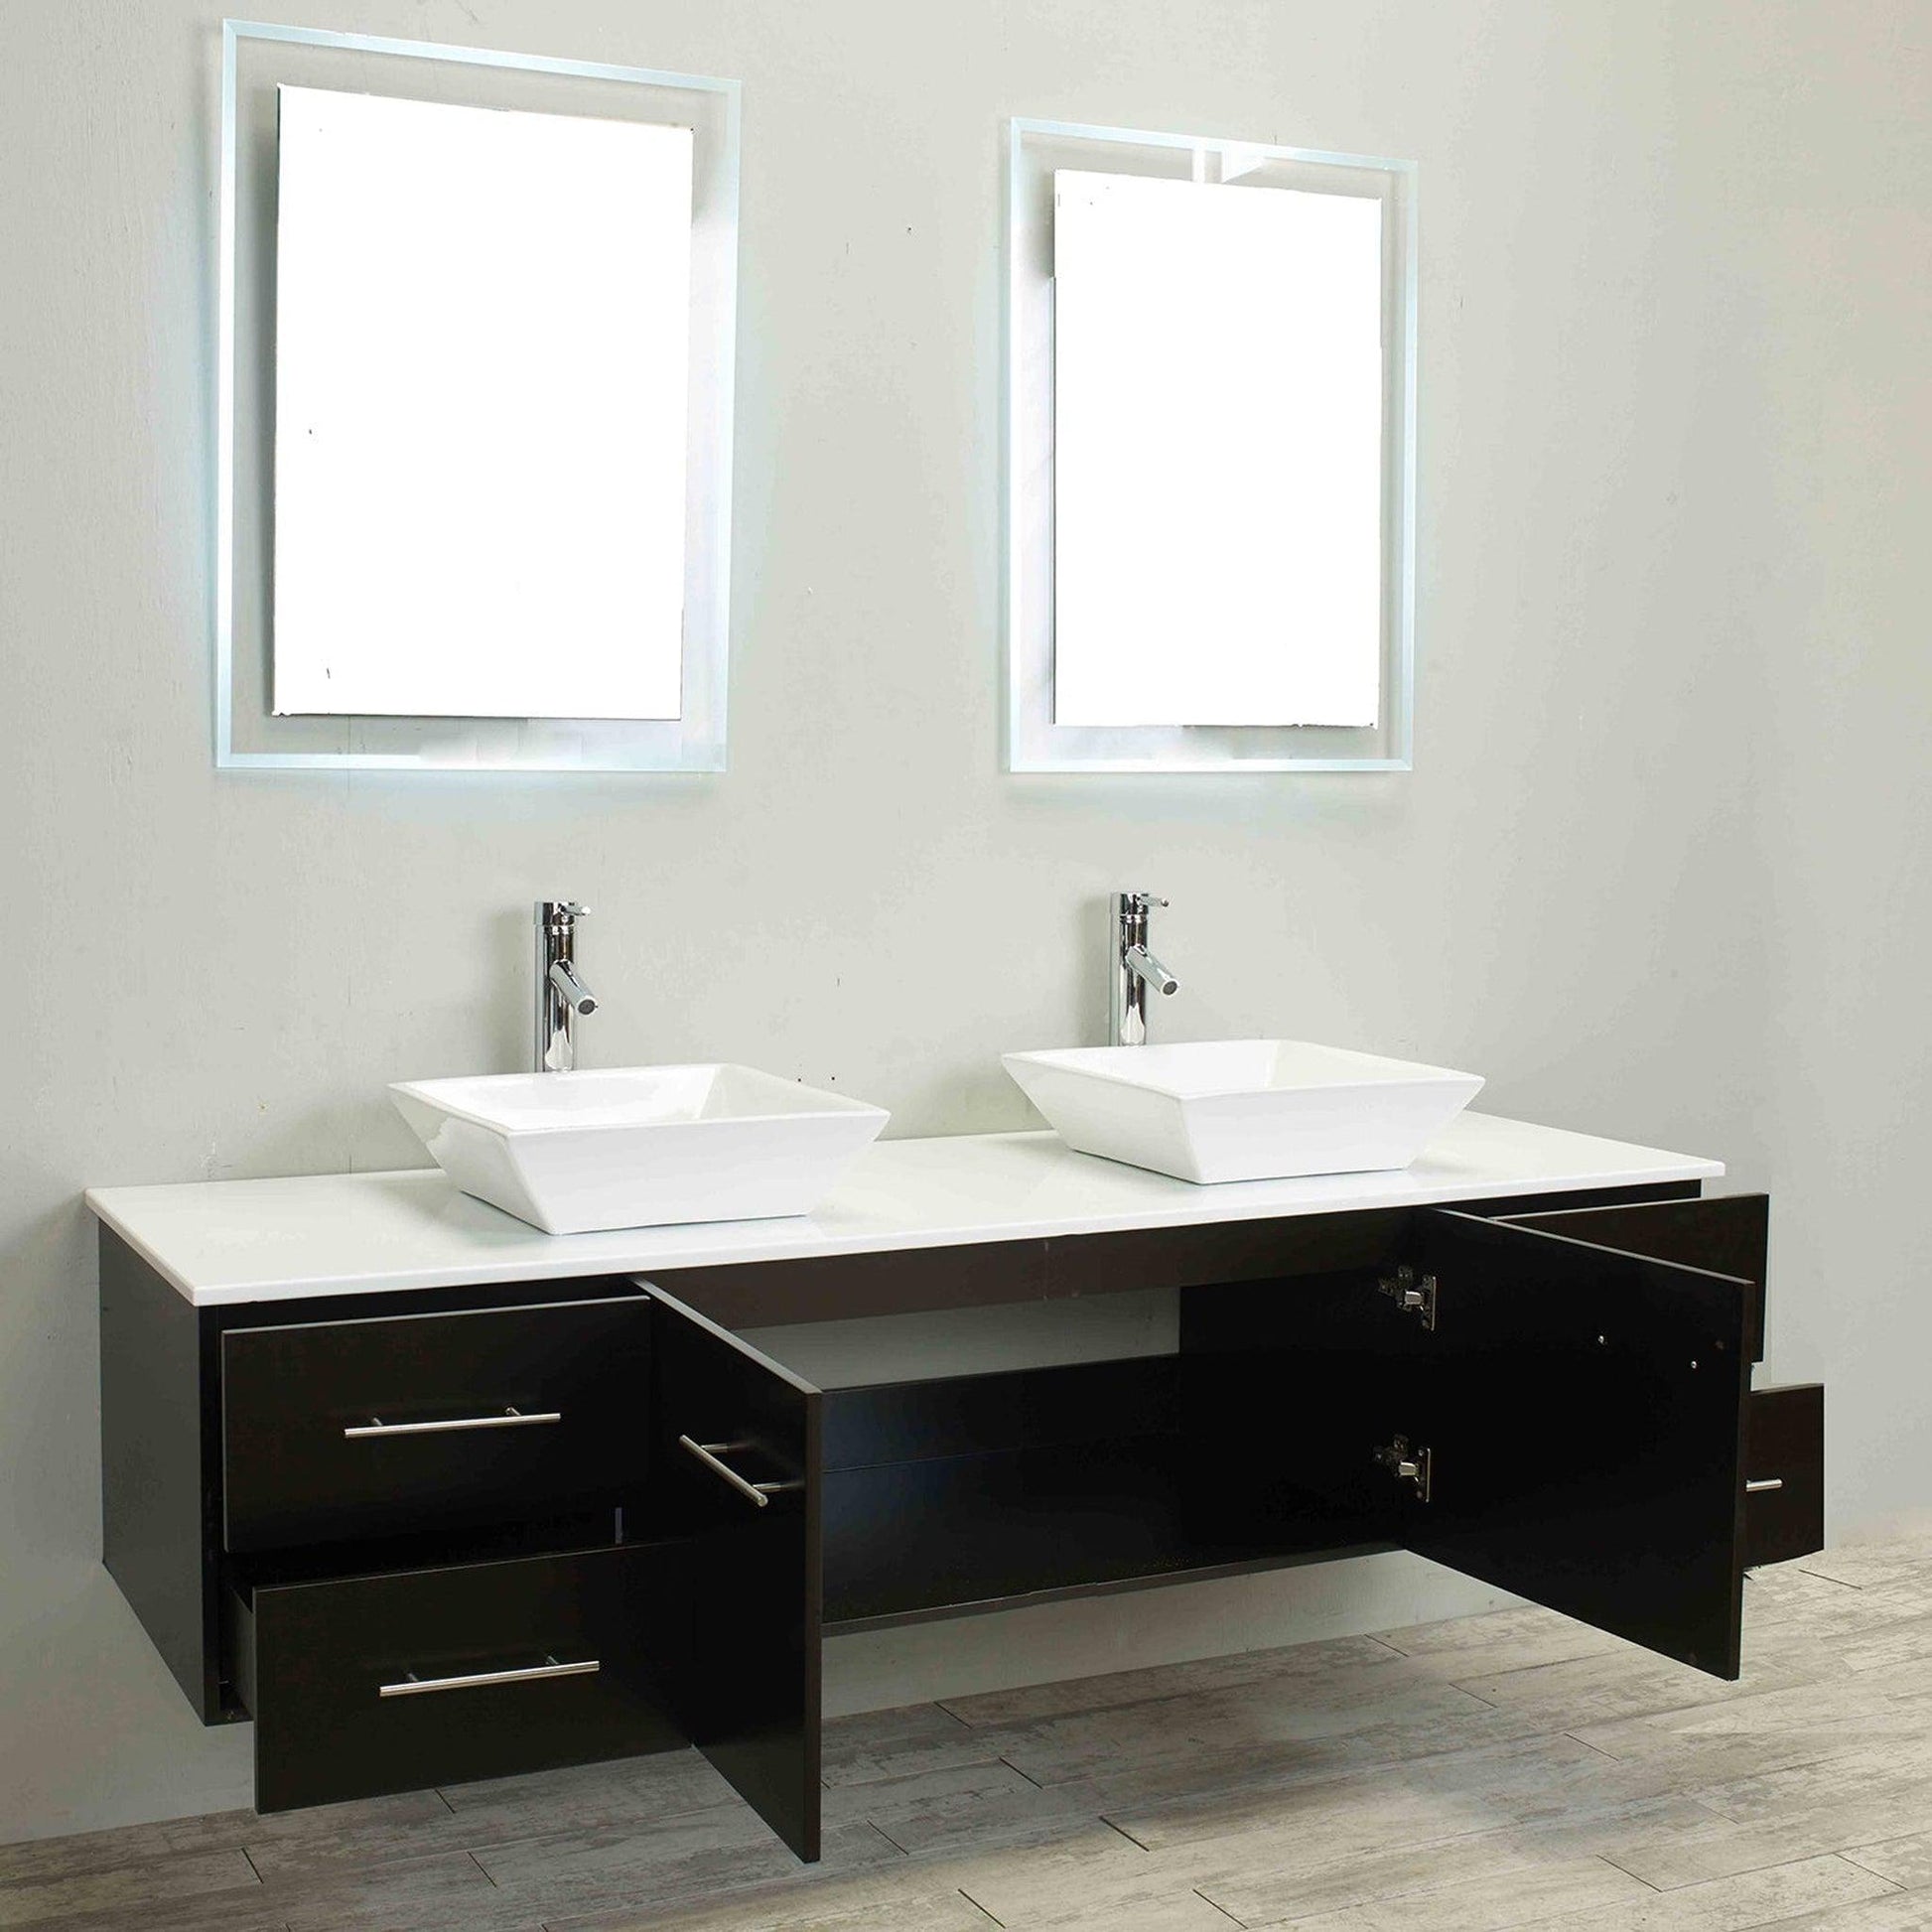 Eviva Totti Wave 60" x 16" Espresso Wall-Mounted Bathroom Vanity With White Man-Made Stone Countertop and Double Porcelain Sink